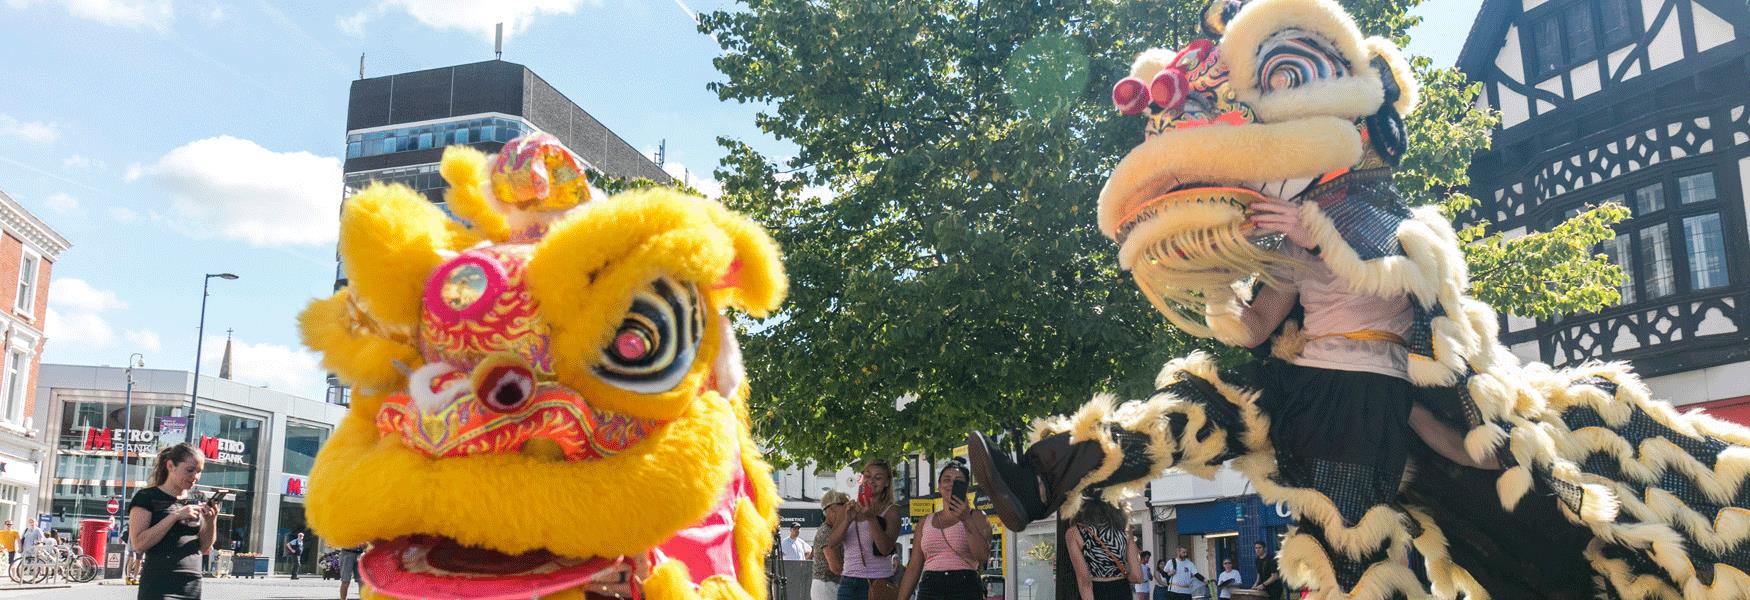 Celebrate Lunar New Year in Maidstone with the dancing Lions